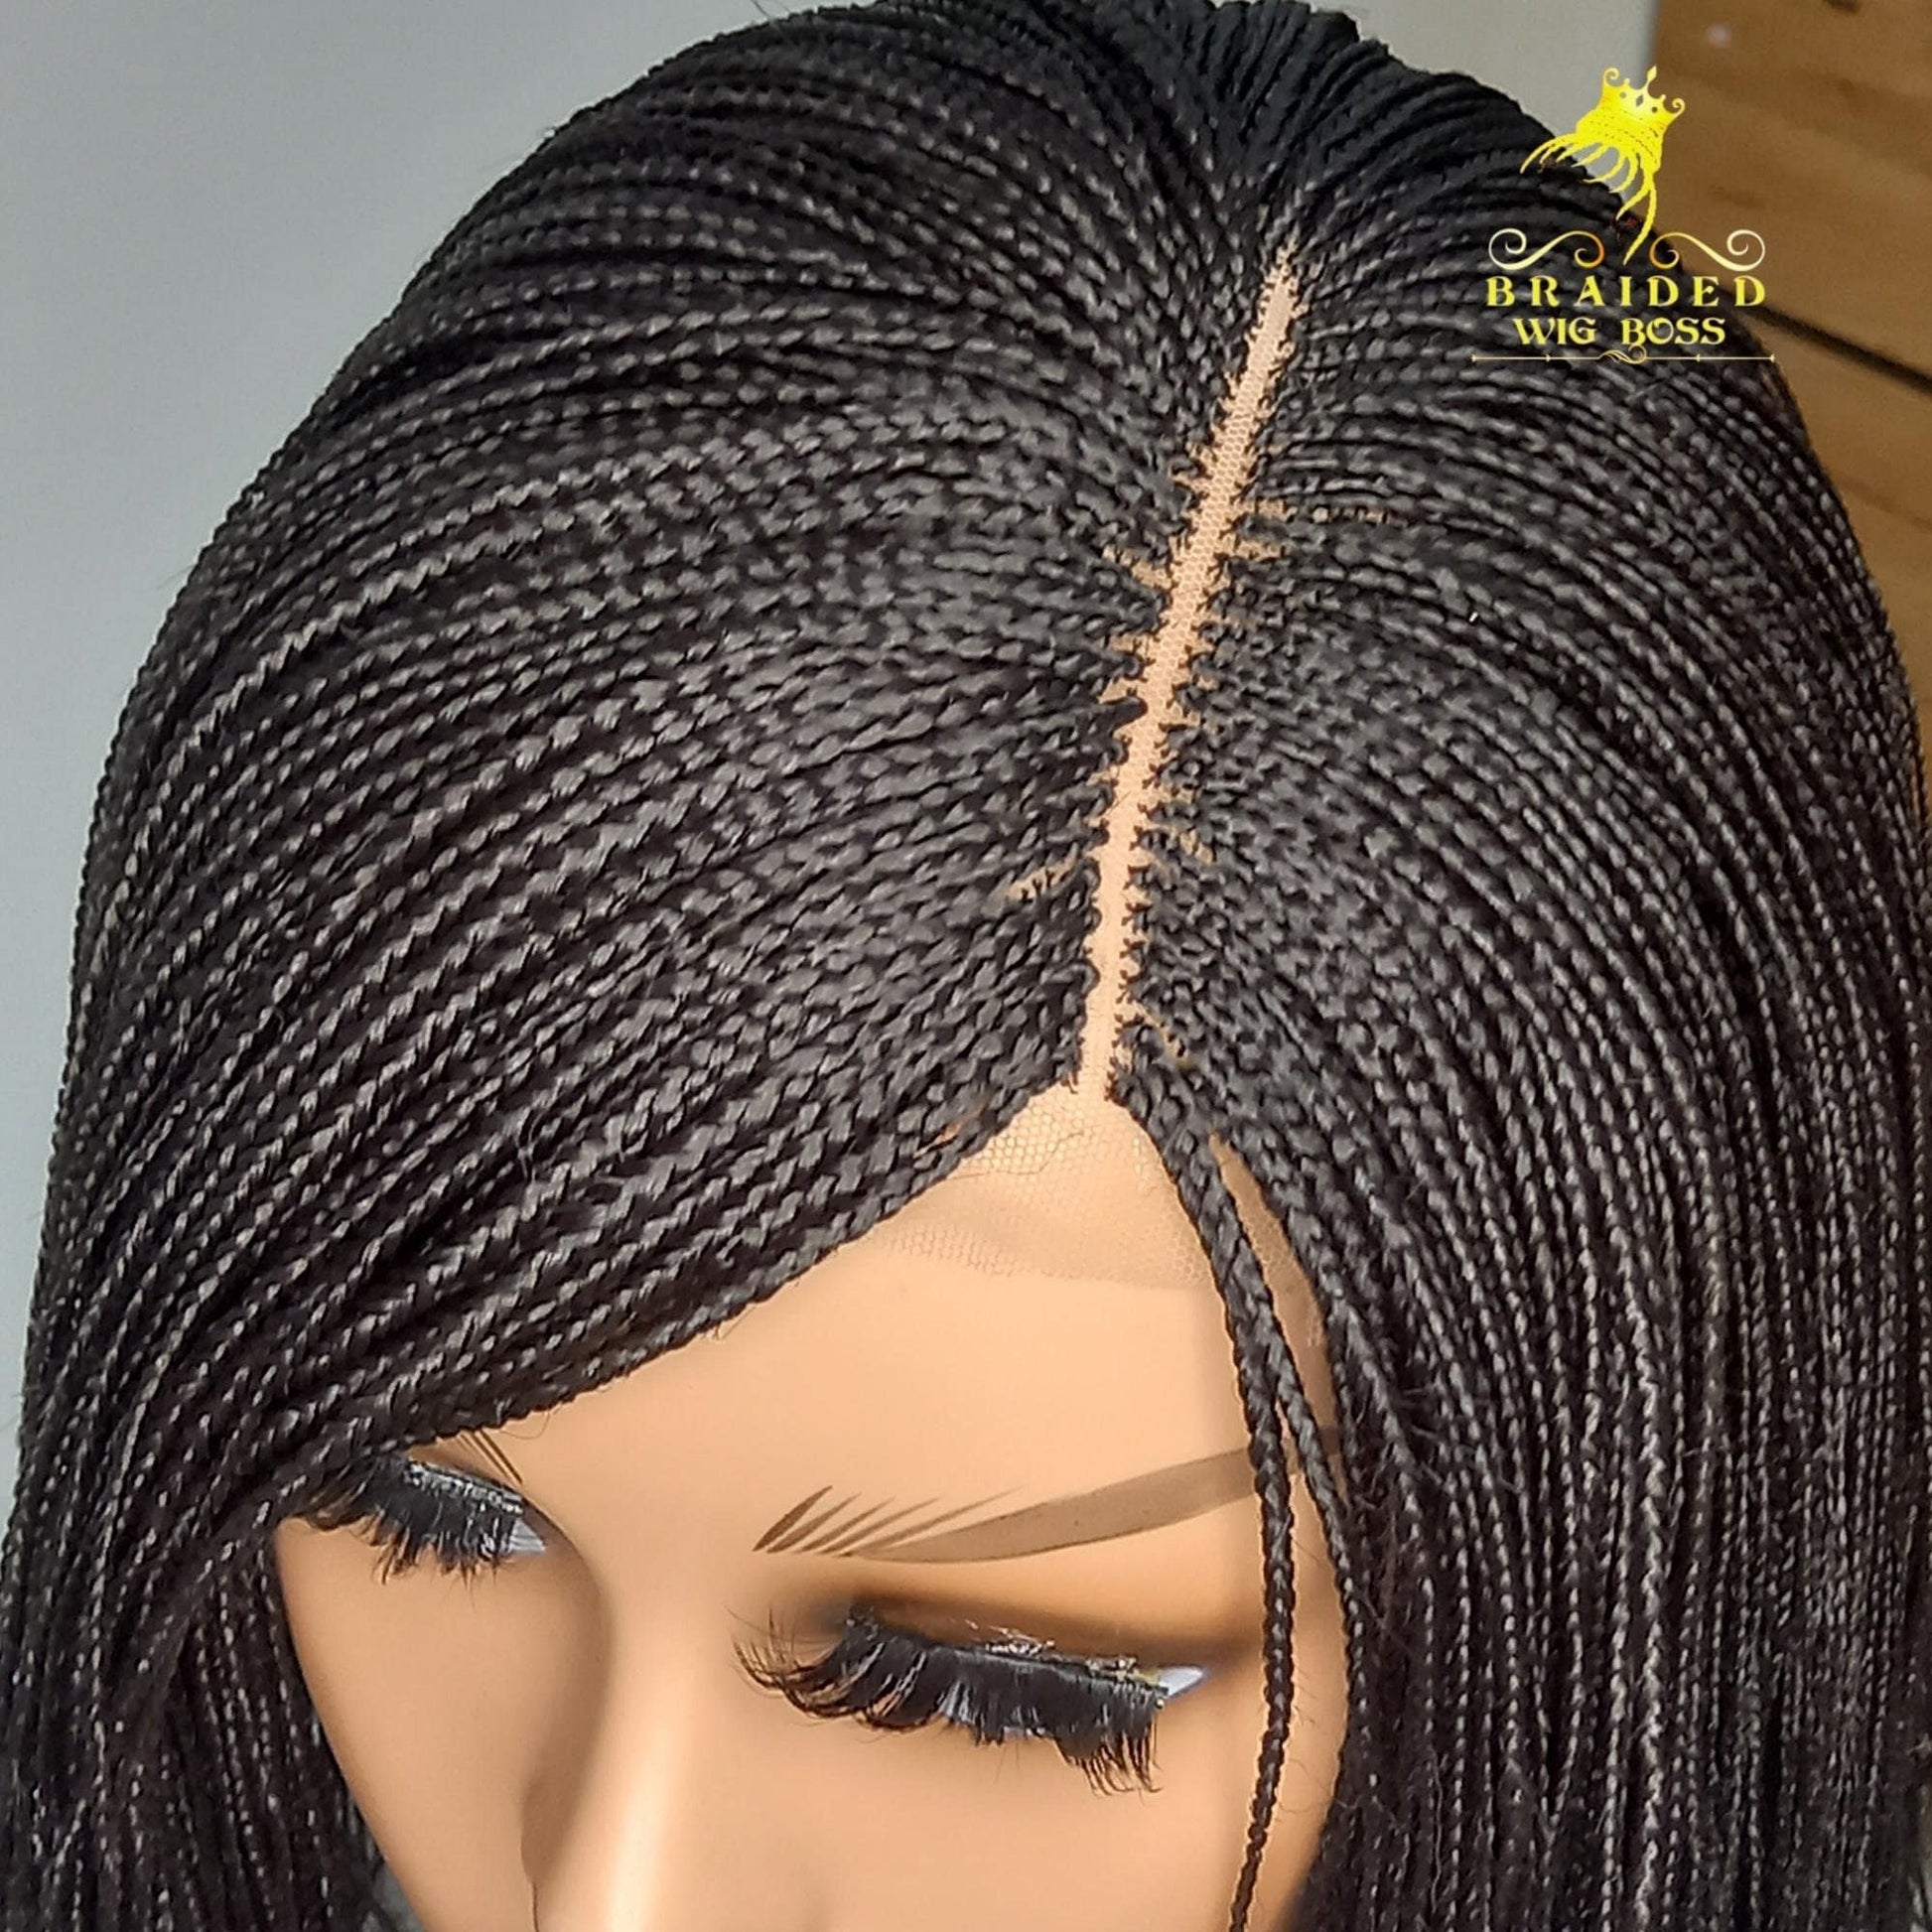 10 Inches Short Micro Braid Wig on 2 By 4 Lace Front Color 2 Without Baby Hairs Glueless Braided Lace Wig for Black Women - BRAIDED WIG BOSS